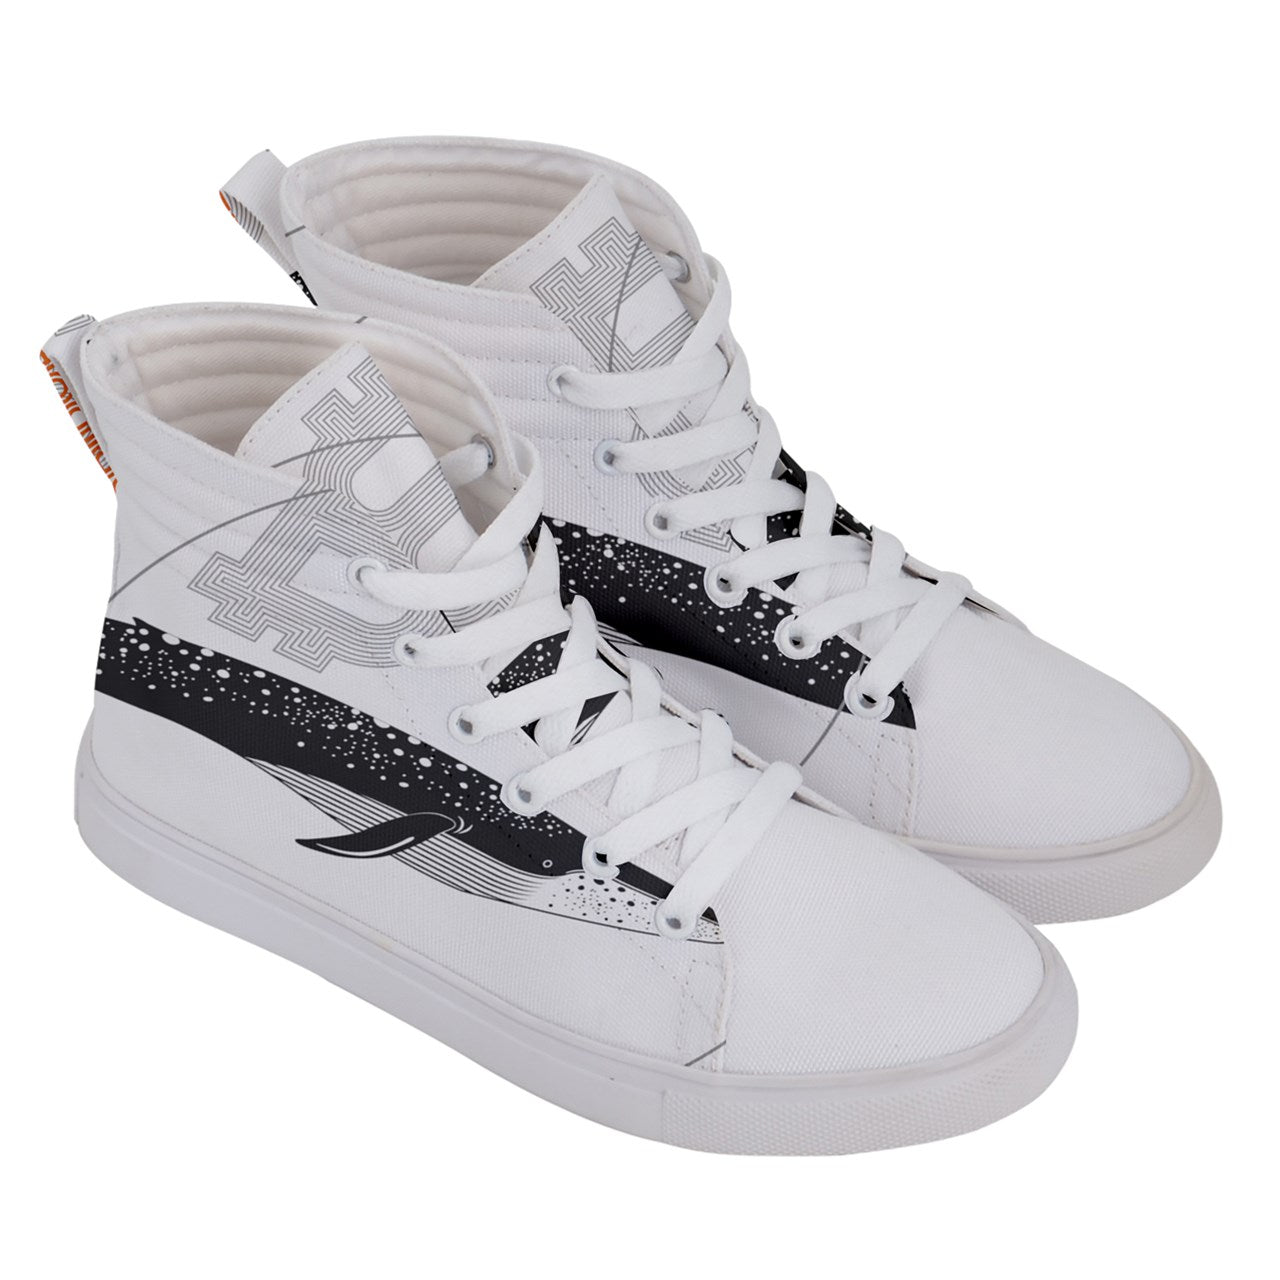 DPIDOL Freestyle Collection Women's Hi-Top Skate Sneakers